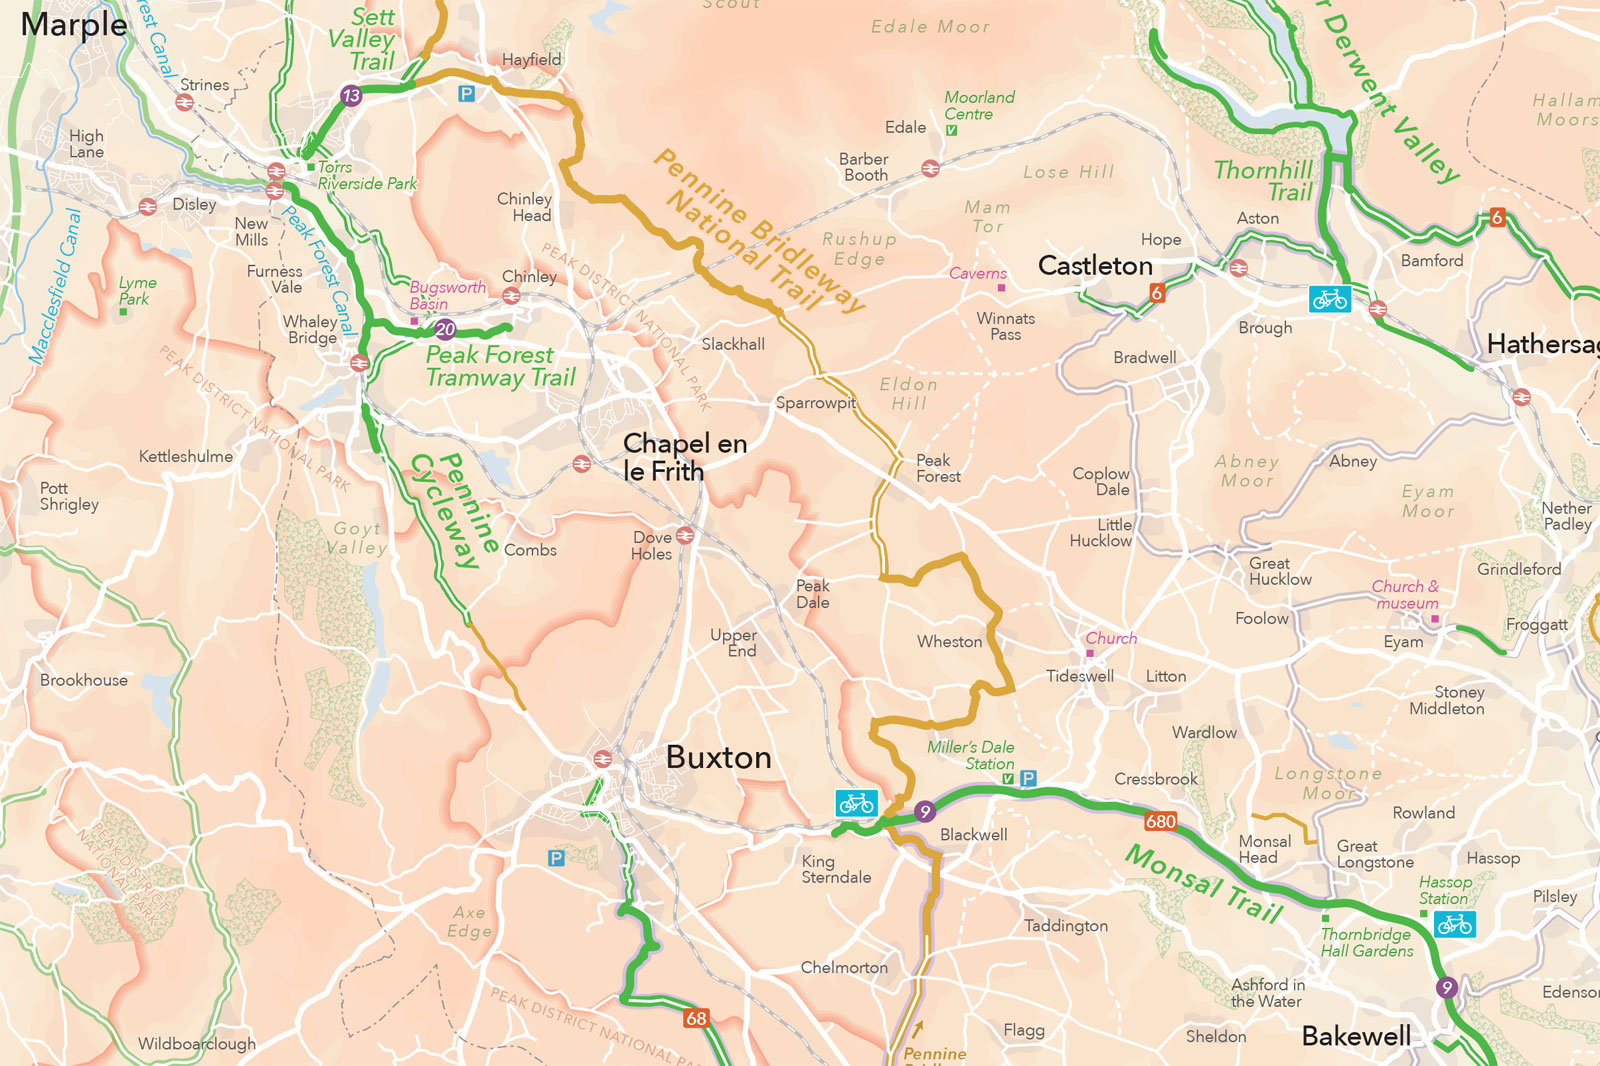 There's one huge gap in the High Peak cycling network which is going to be one heck of a task to bridge (but perhaps extending the Peak Forest Tramway Trail would be a start?)